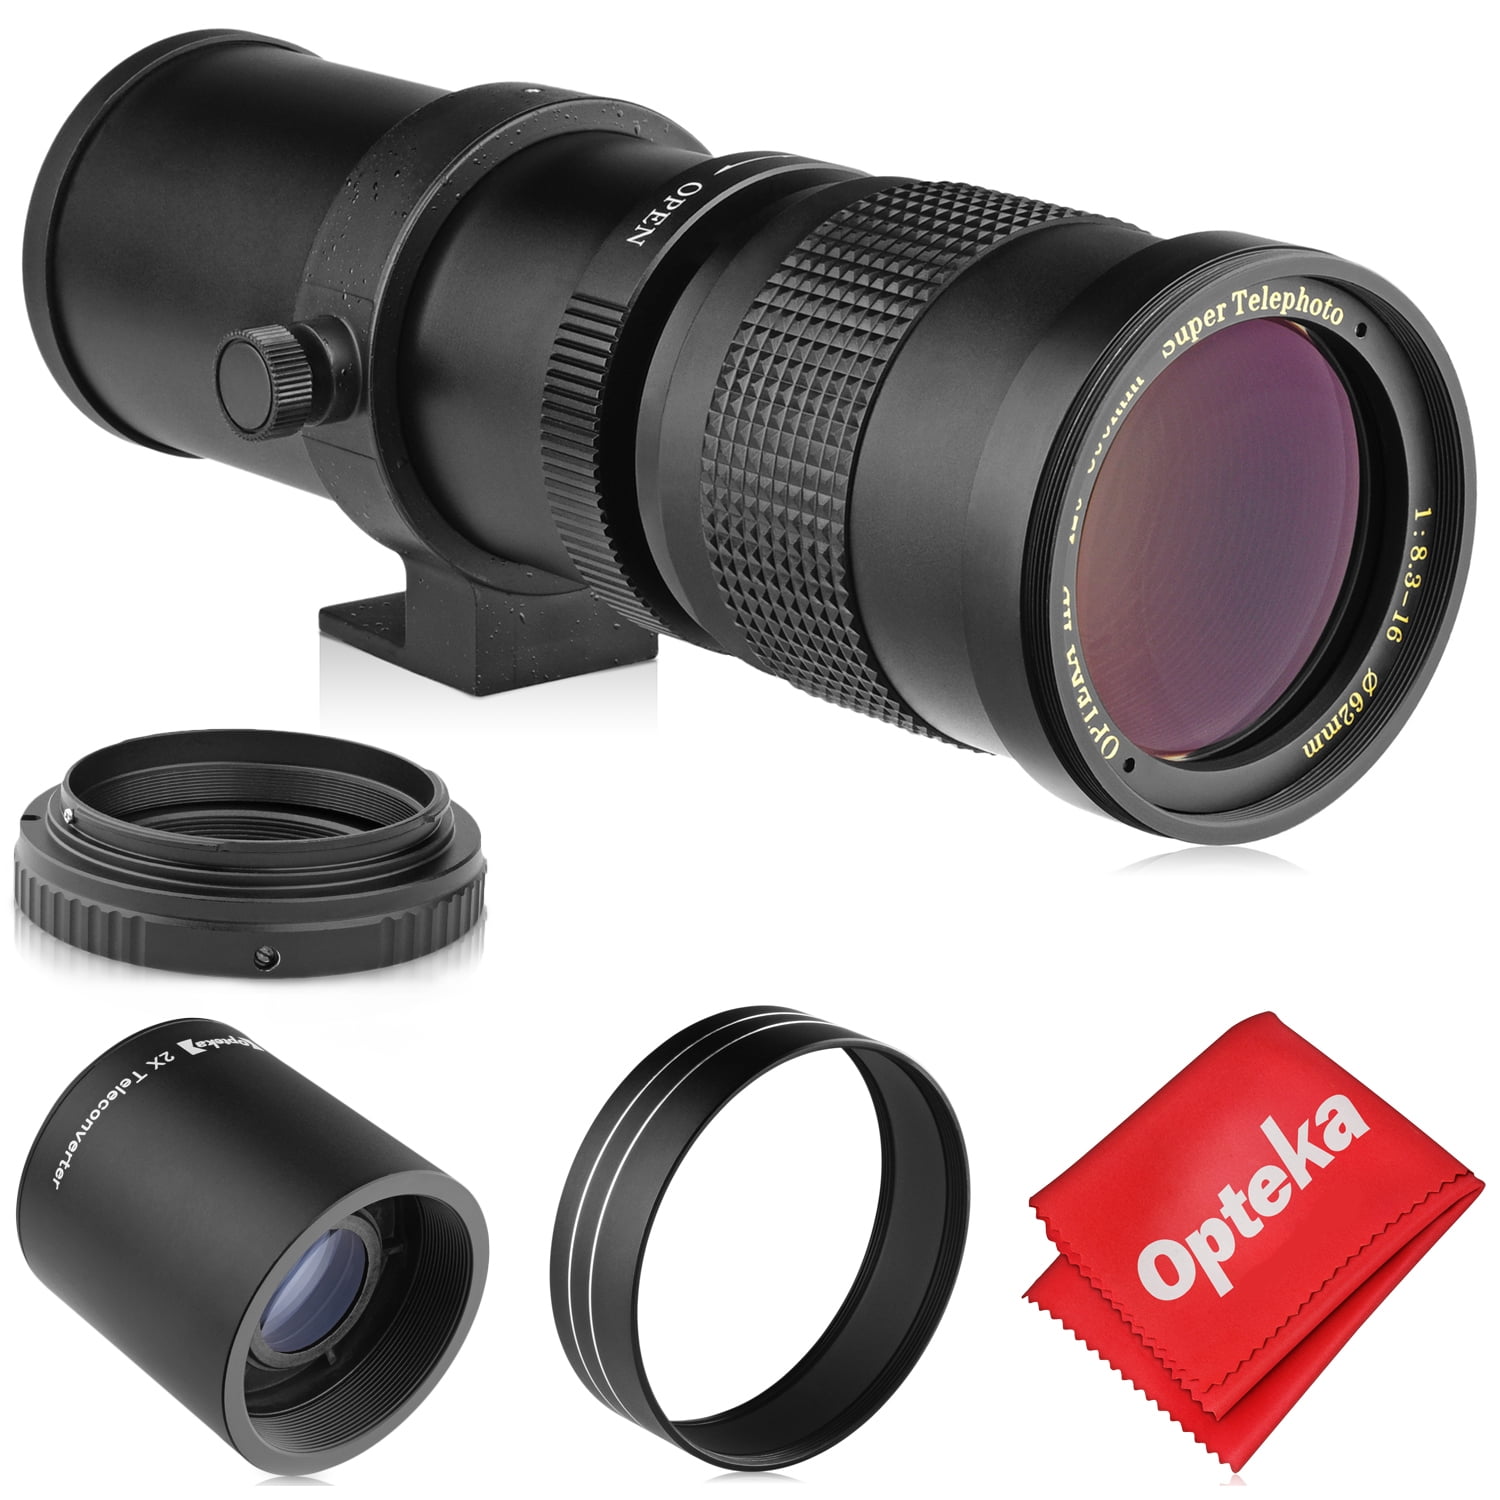 Opteka 420-800mm w/ 2X- 840-1600mm f/8.3 HD Telephoto Zoom Lens for Fuji Fujifilm X-Mount X-Pro3 A3 T30 T2 A1 A7 E3 H1 T3 A5 E2 and T100 Digital Cameras A2 T10 Pro2 T1 T20 